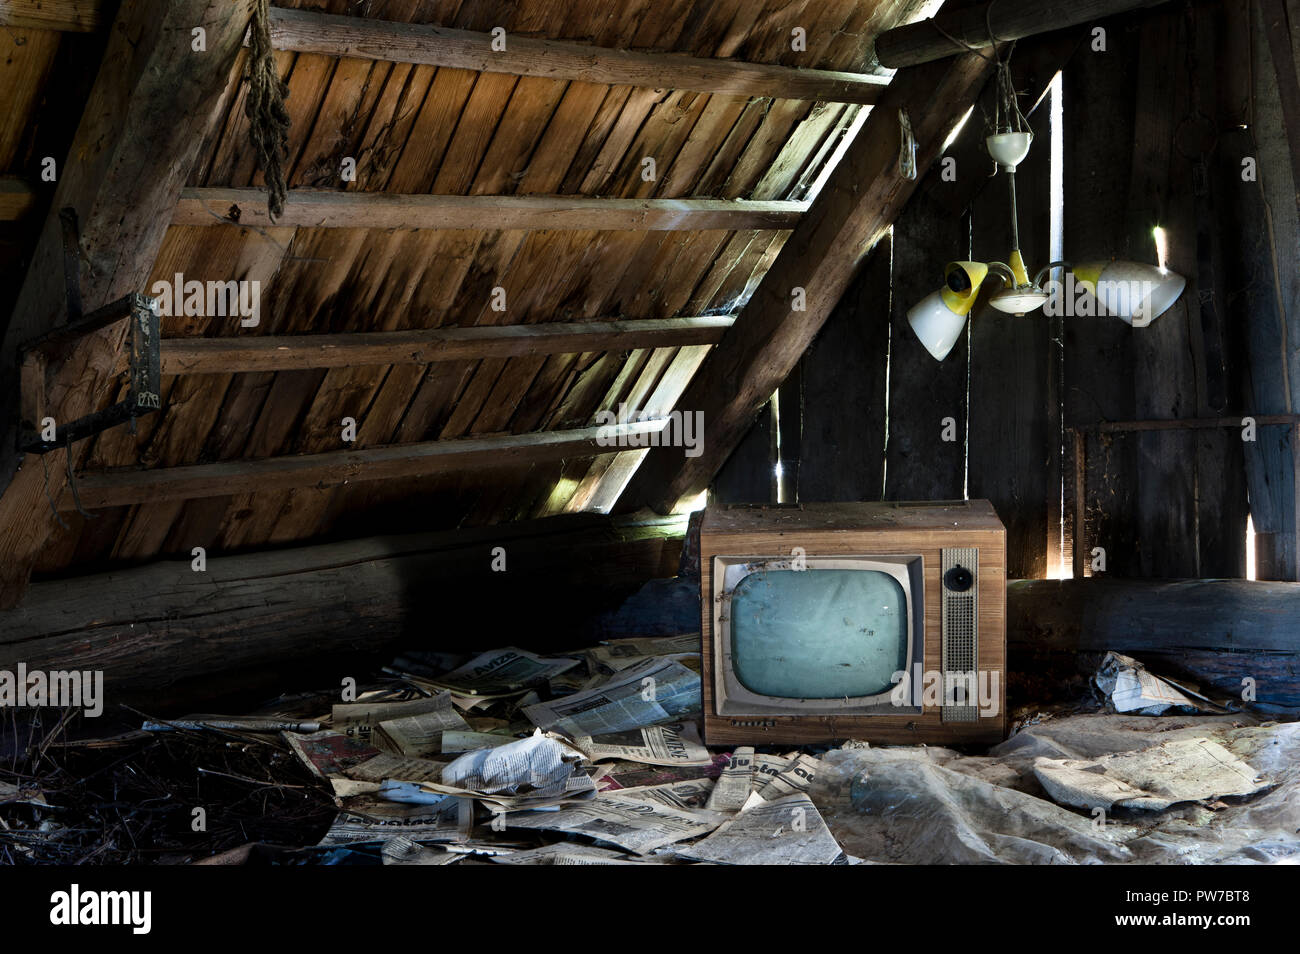 15th September, 2014. An old black and white television stored in an attic of an abandoned house in Skrunda, Latvia. Stock Photo